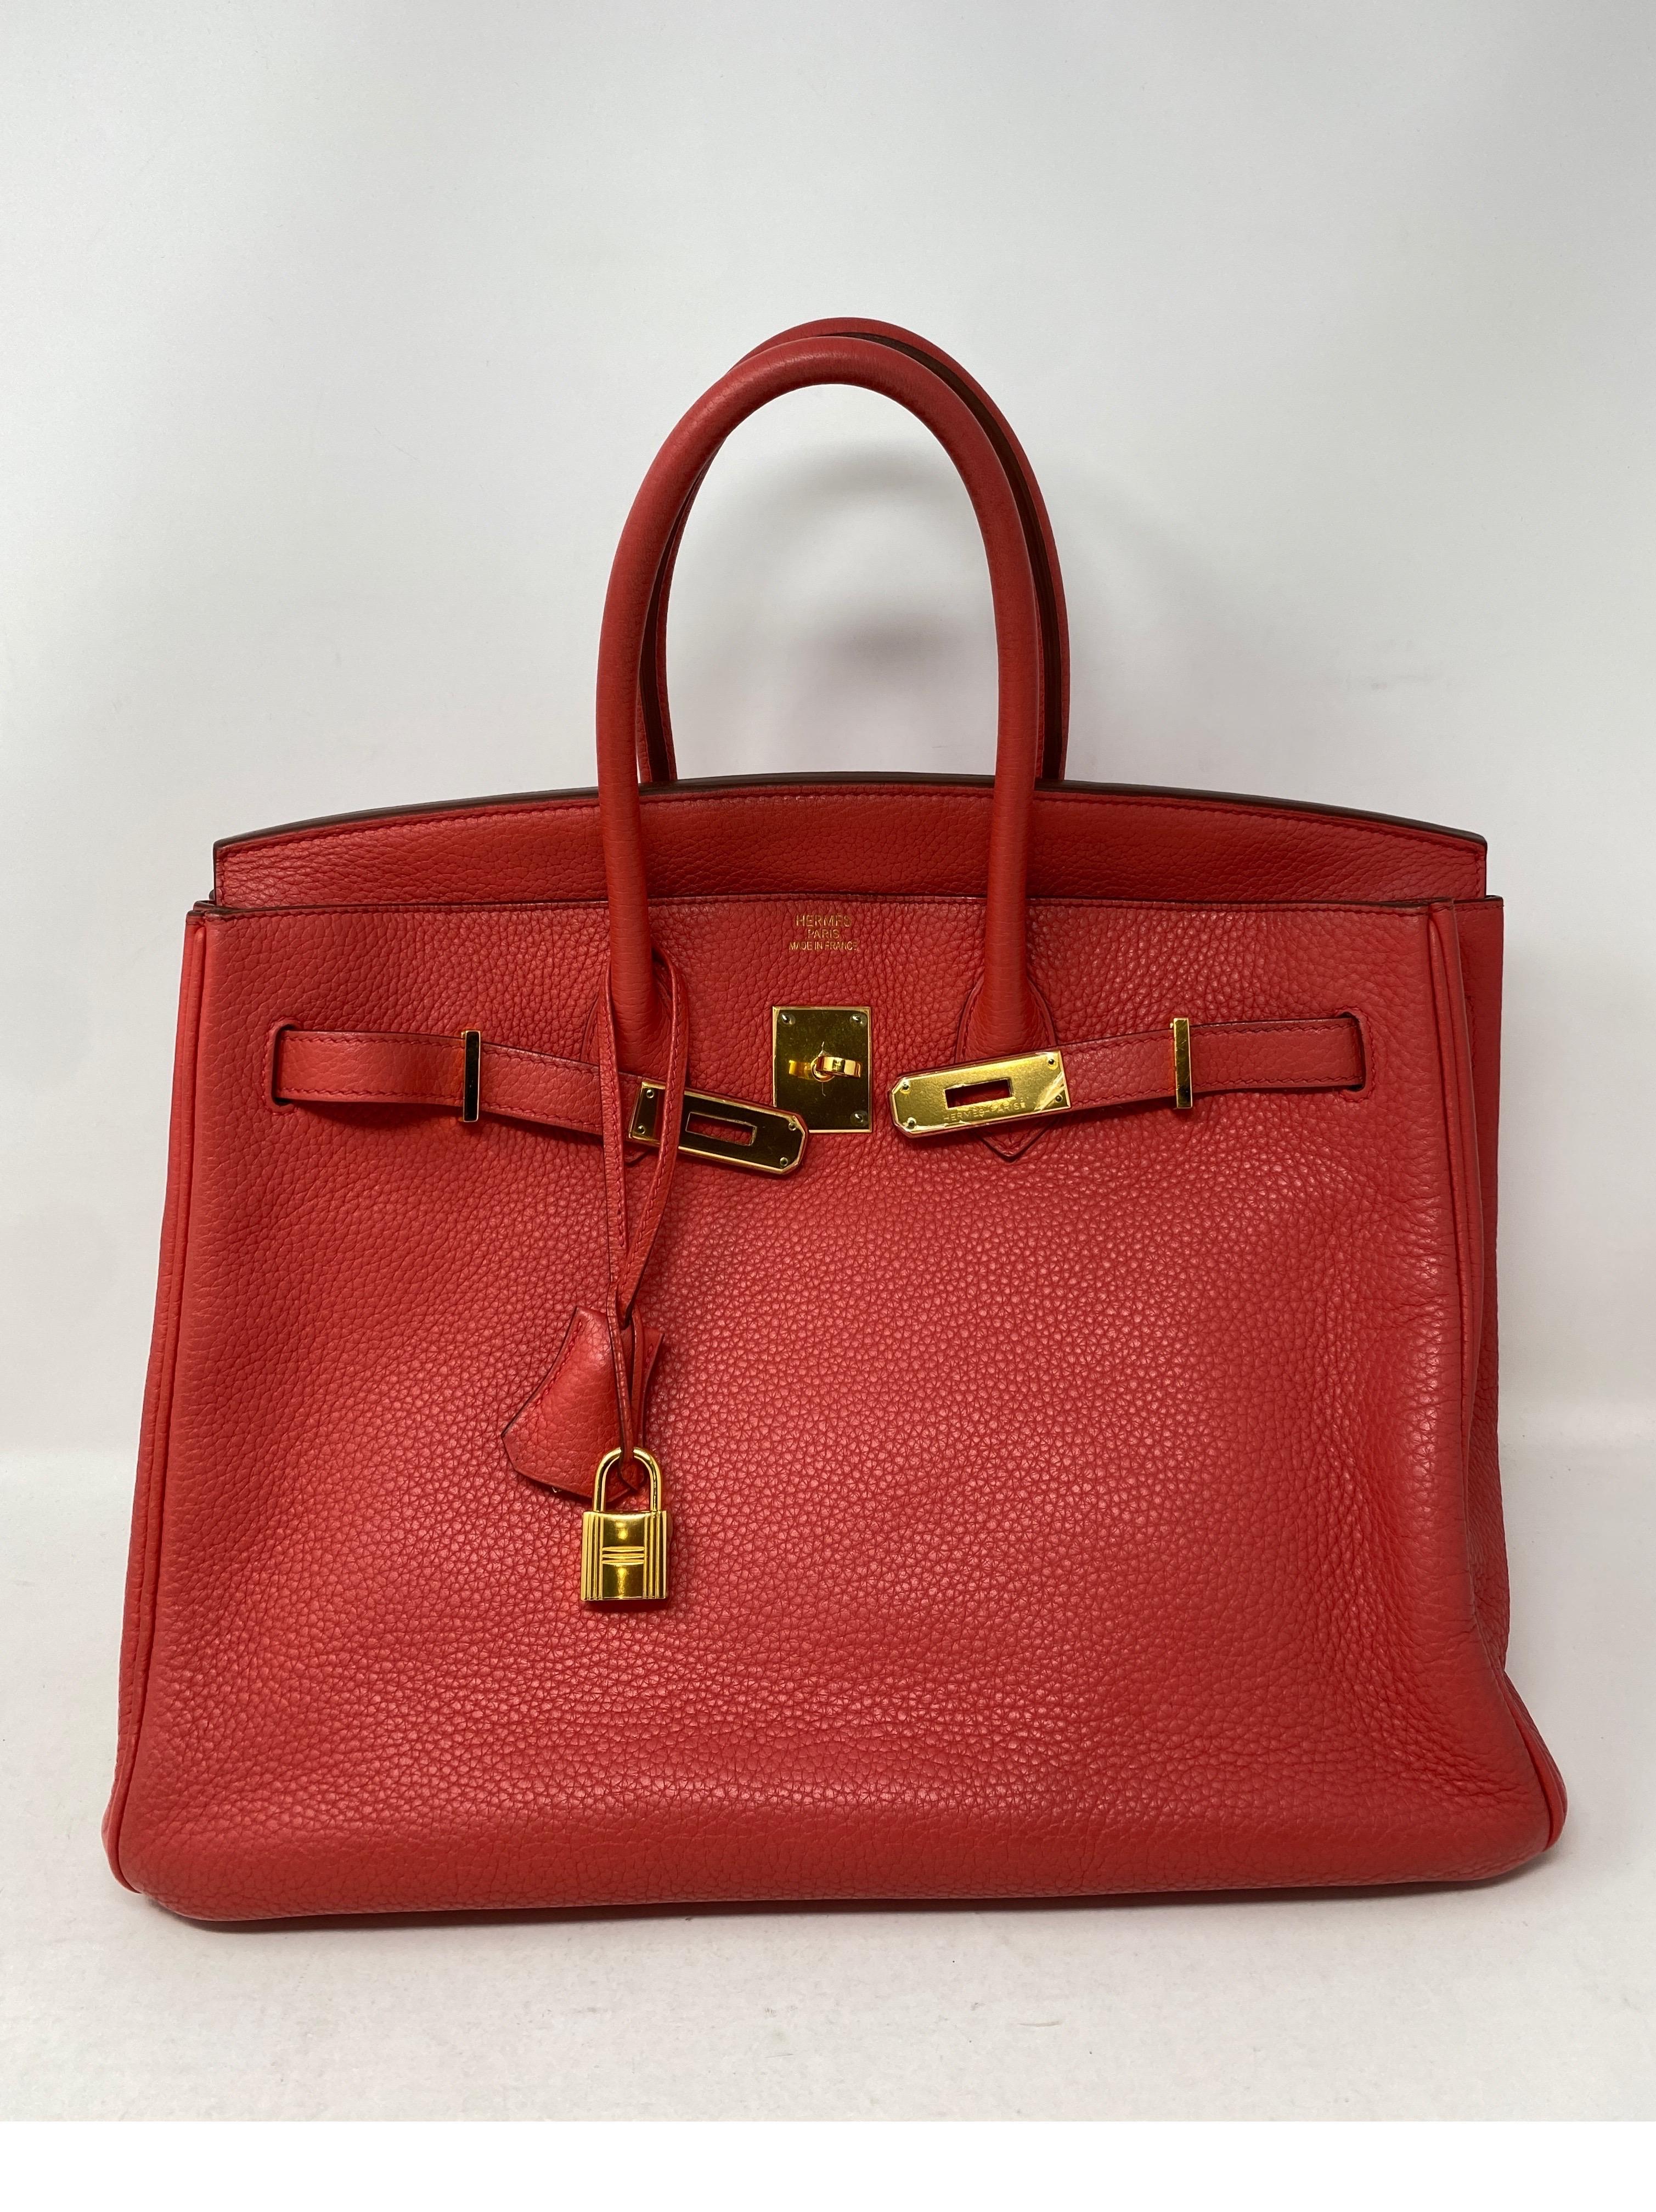 Hermes Birkin Bouganvillea Pink 35 Bag. Gold hardware. Pretty rosy pink salmon color. Good condition. Clemence leather. Includes clochette, lock, keys, and dust cover. Guaranteed authentic. 